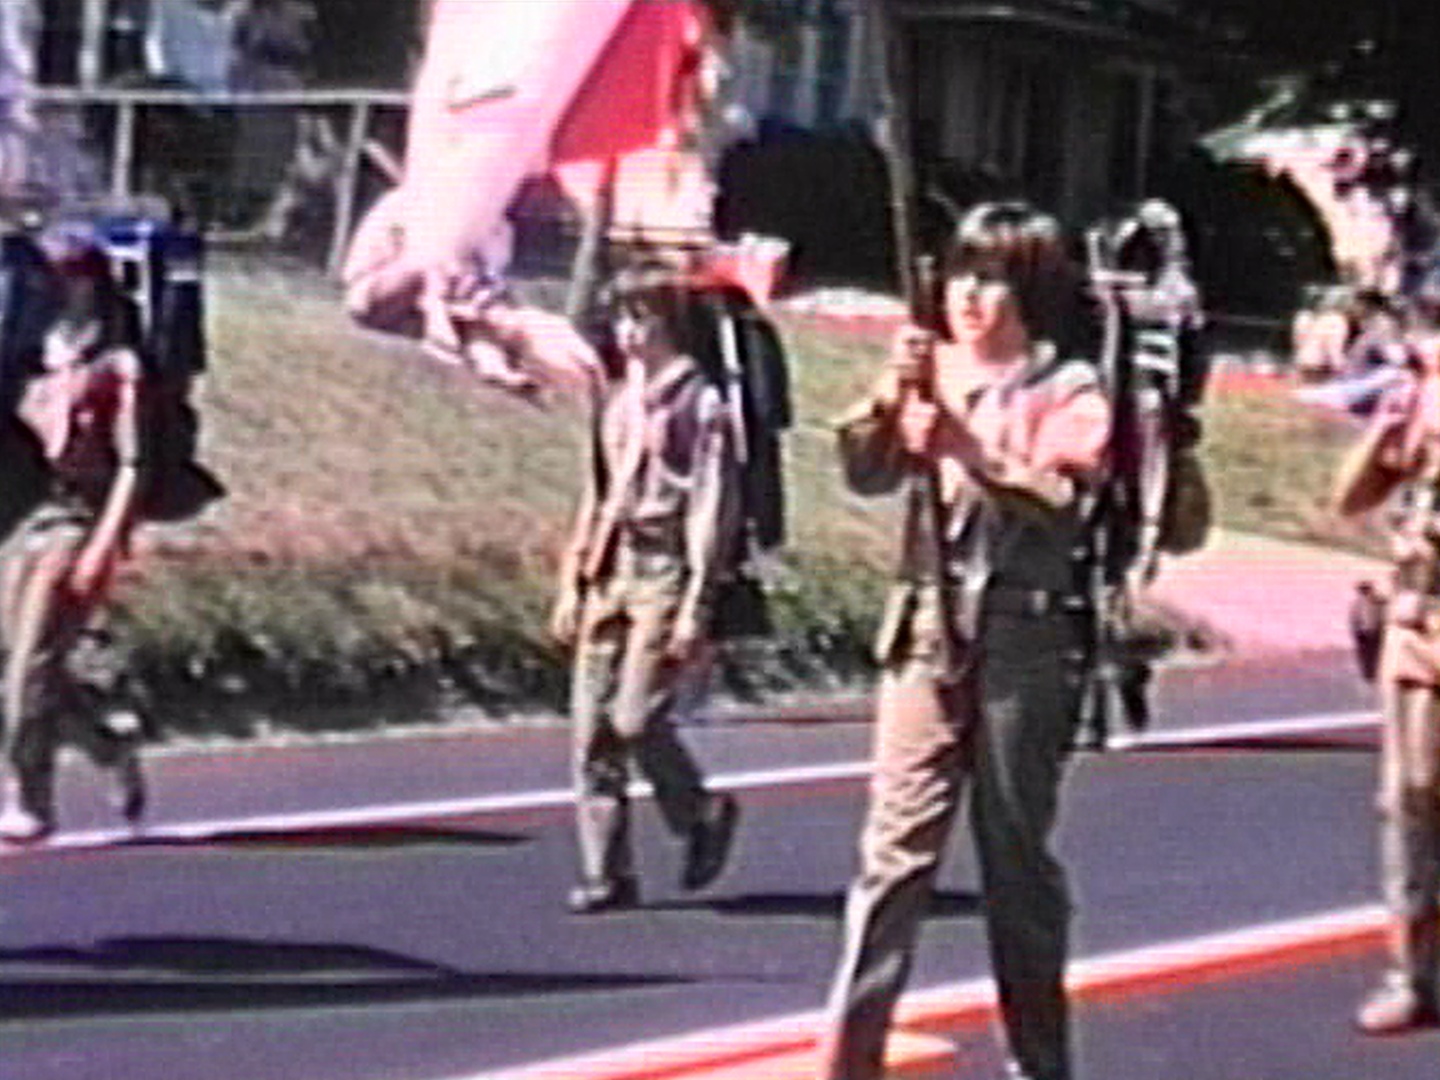 Boy Scouts parade 1976 in Ringoes, NJ. 